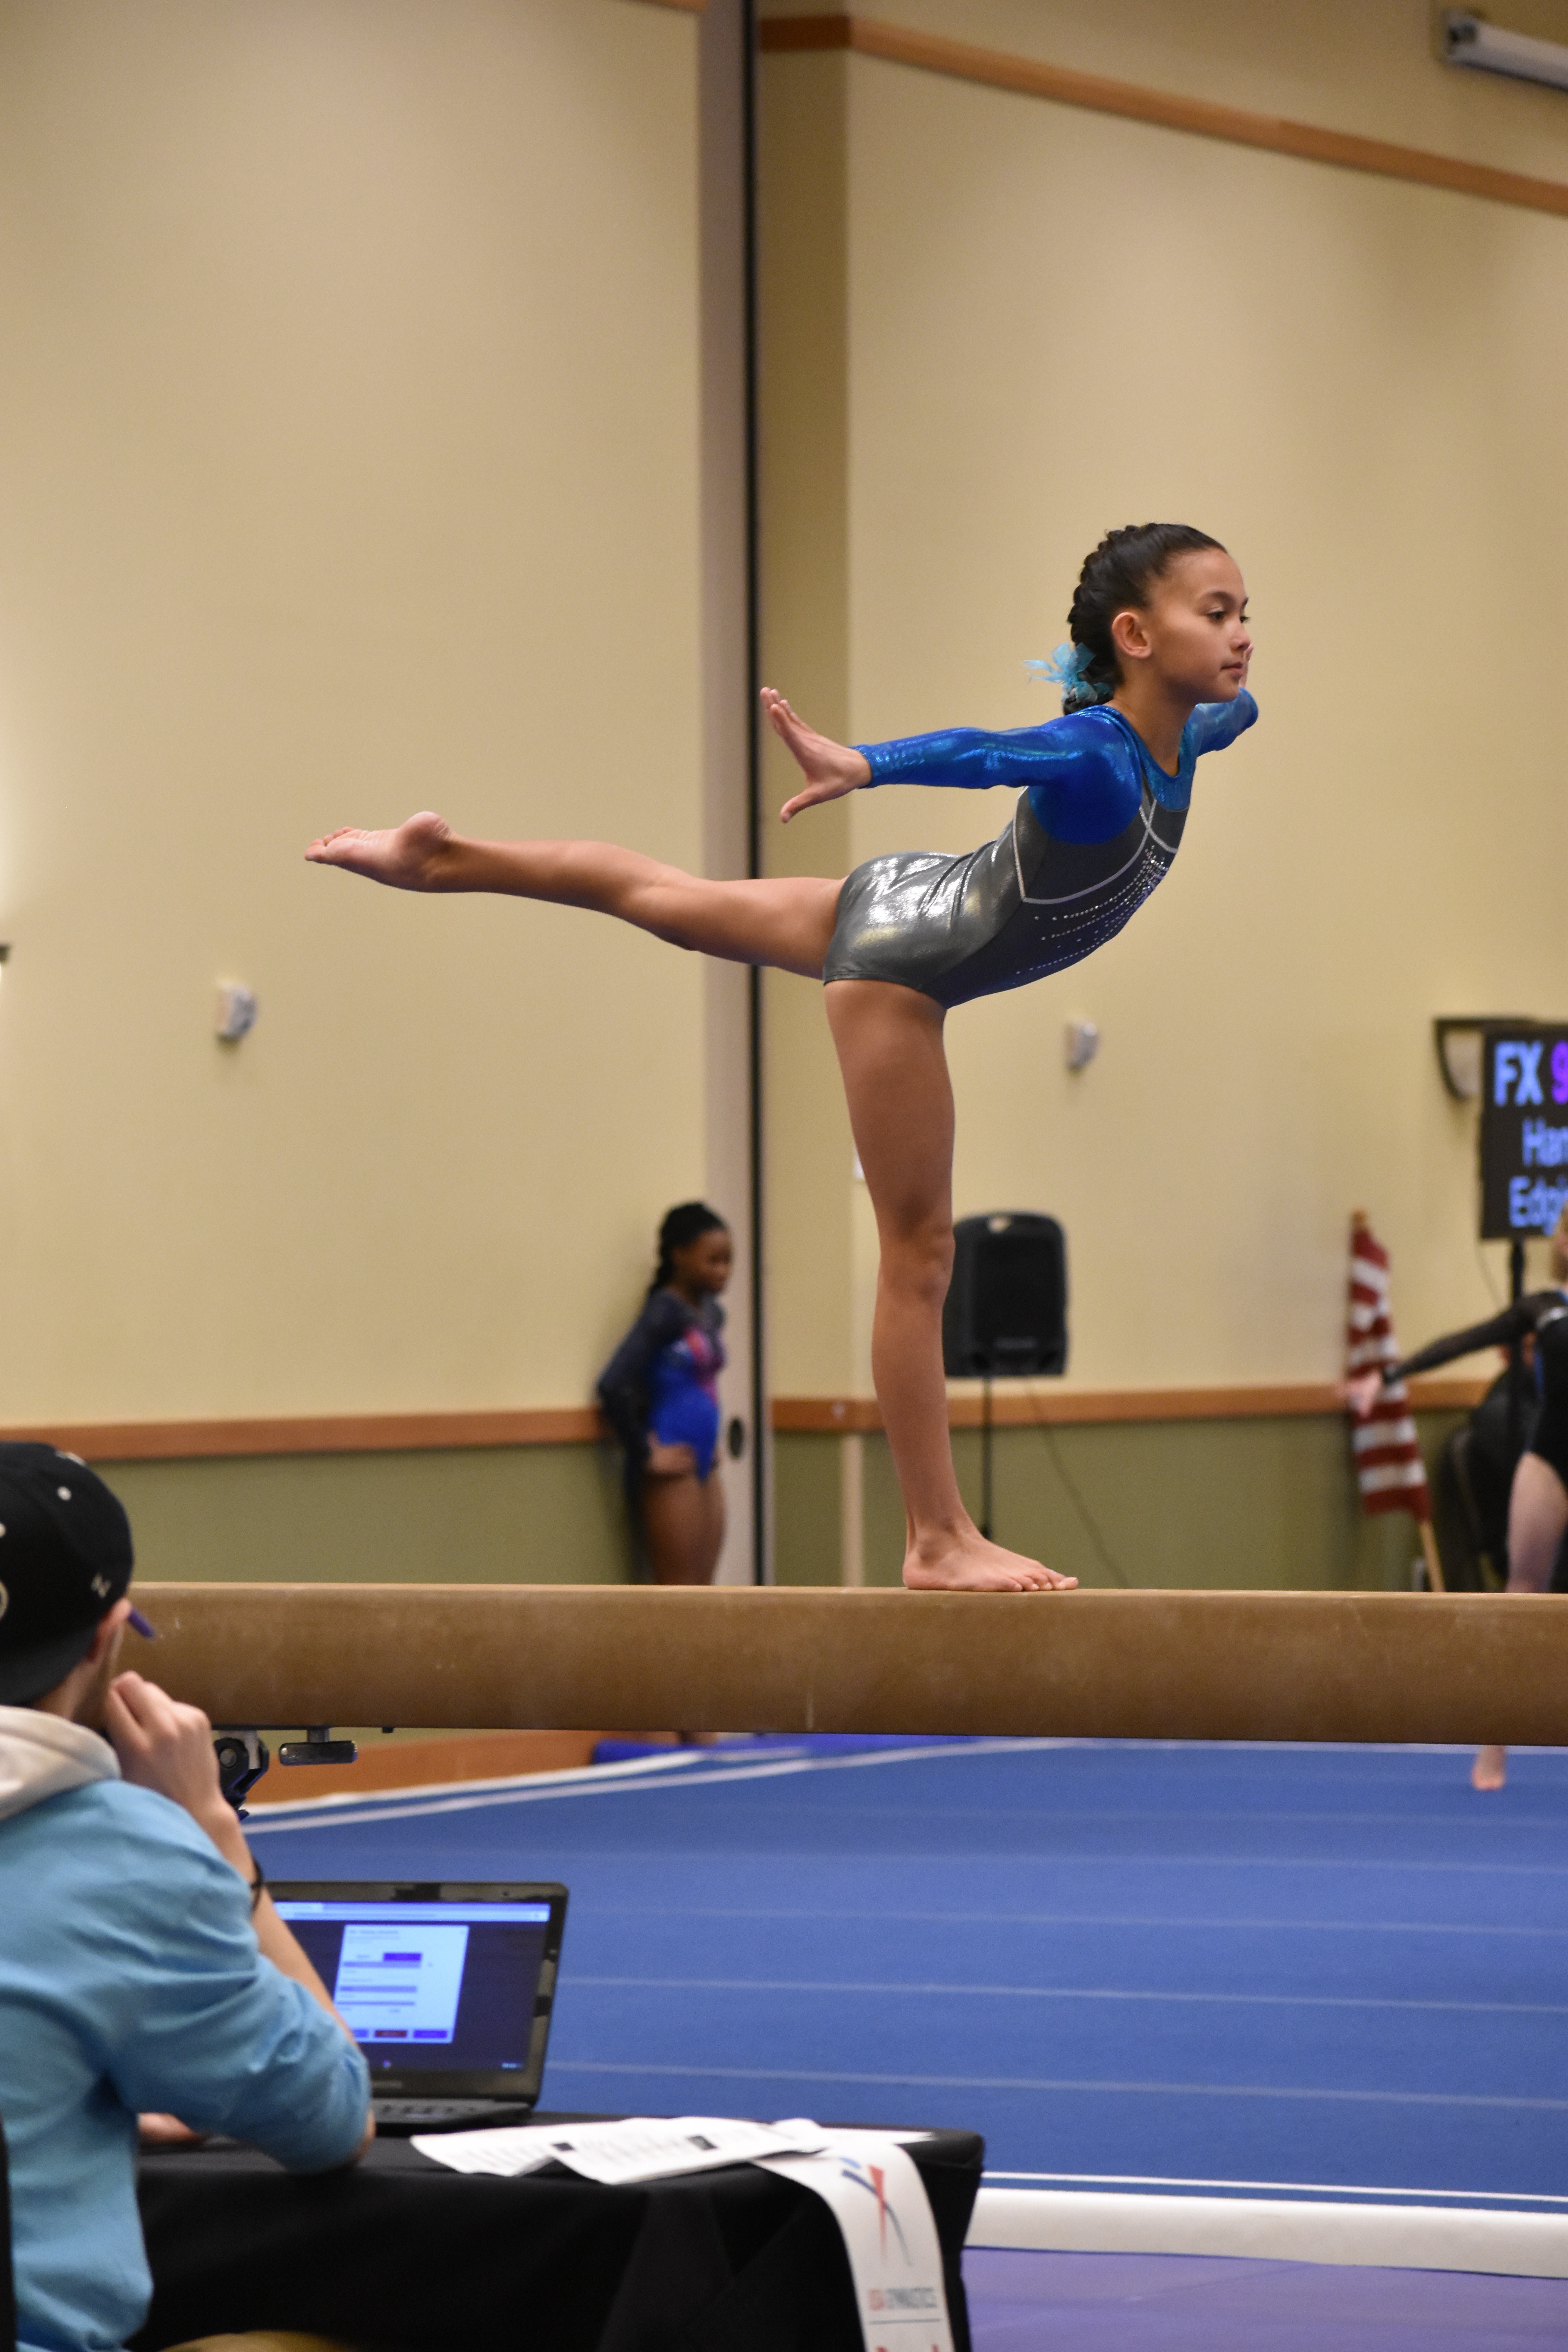 QCGE Competitive Gymnastics | Kids First, Too - Where Kids Love to Learn!